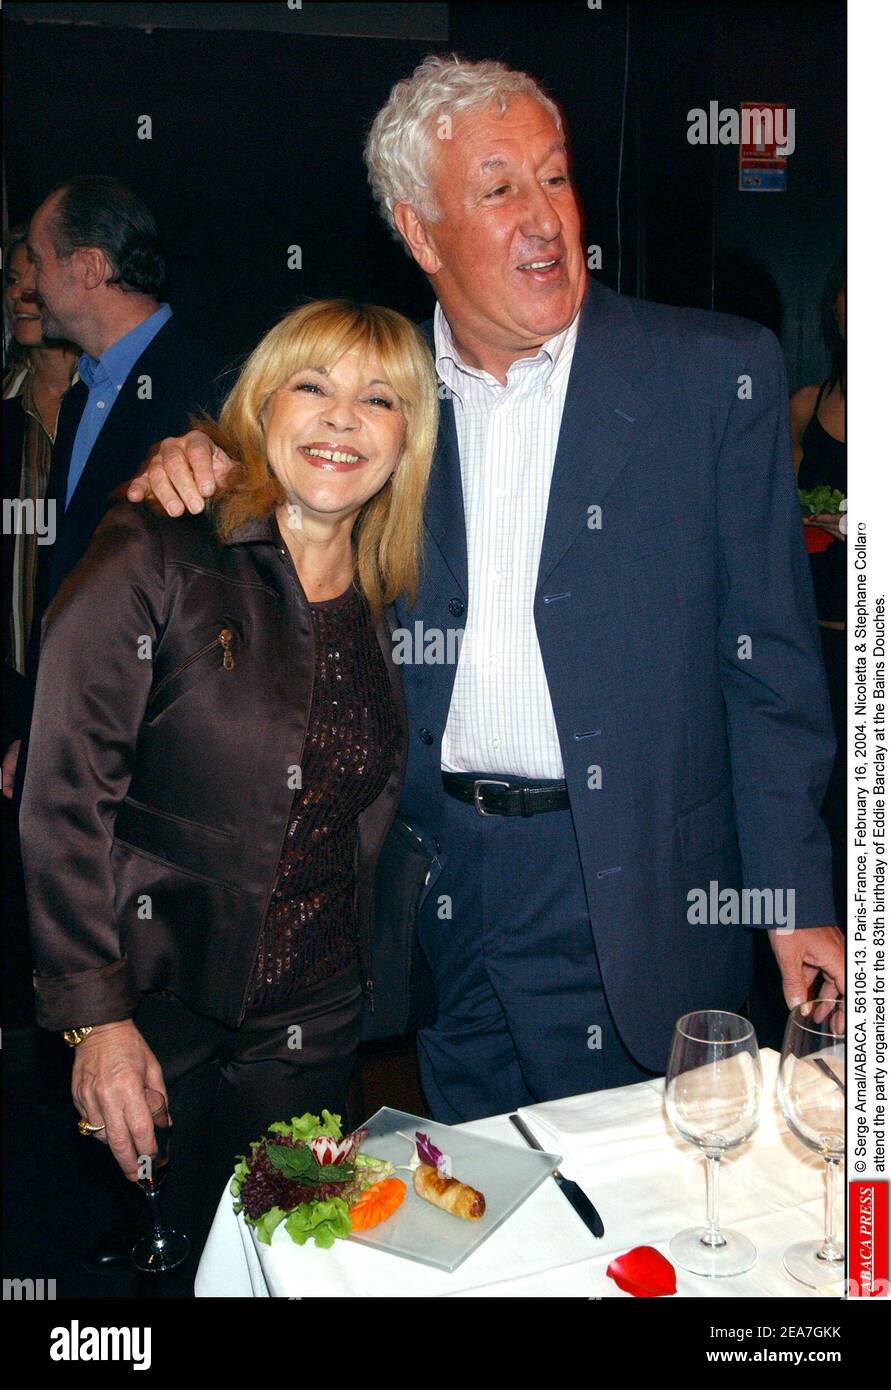 © Serge Arnal/ABACA. 56106-13. Paris-France, February 16, 2004. Nicoletta & Stephane Collaro attend the party organized for the 83rd birthday of Eddie Barclay at the Bains Douches. Stock Photo